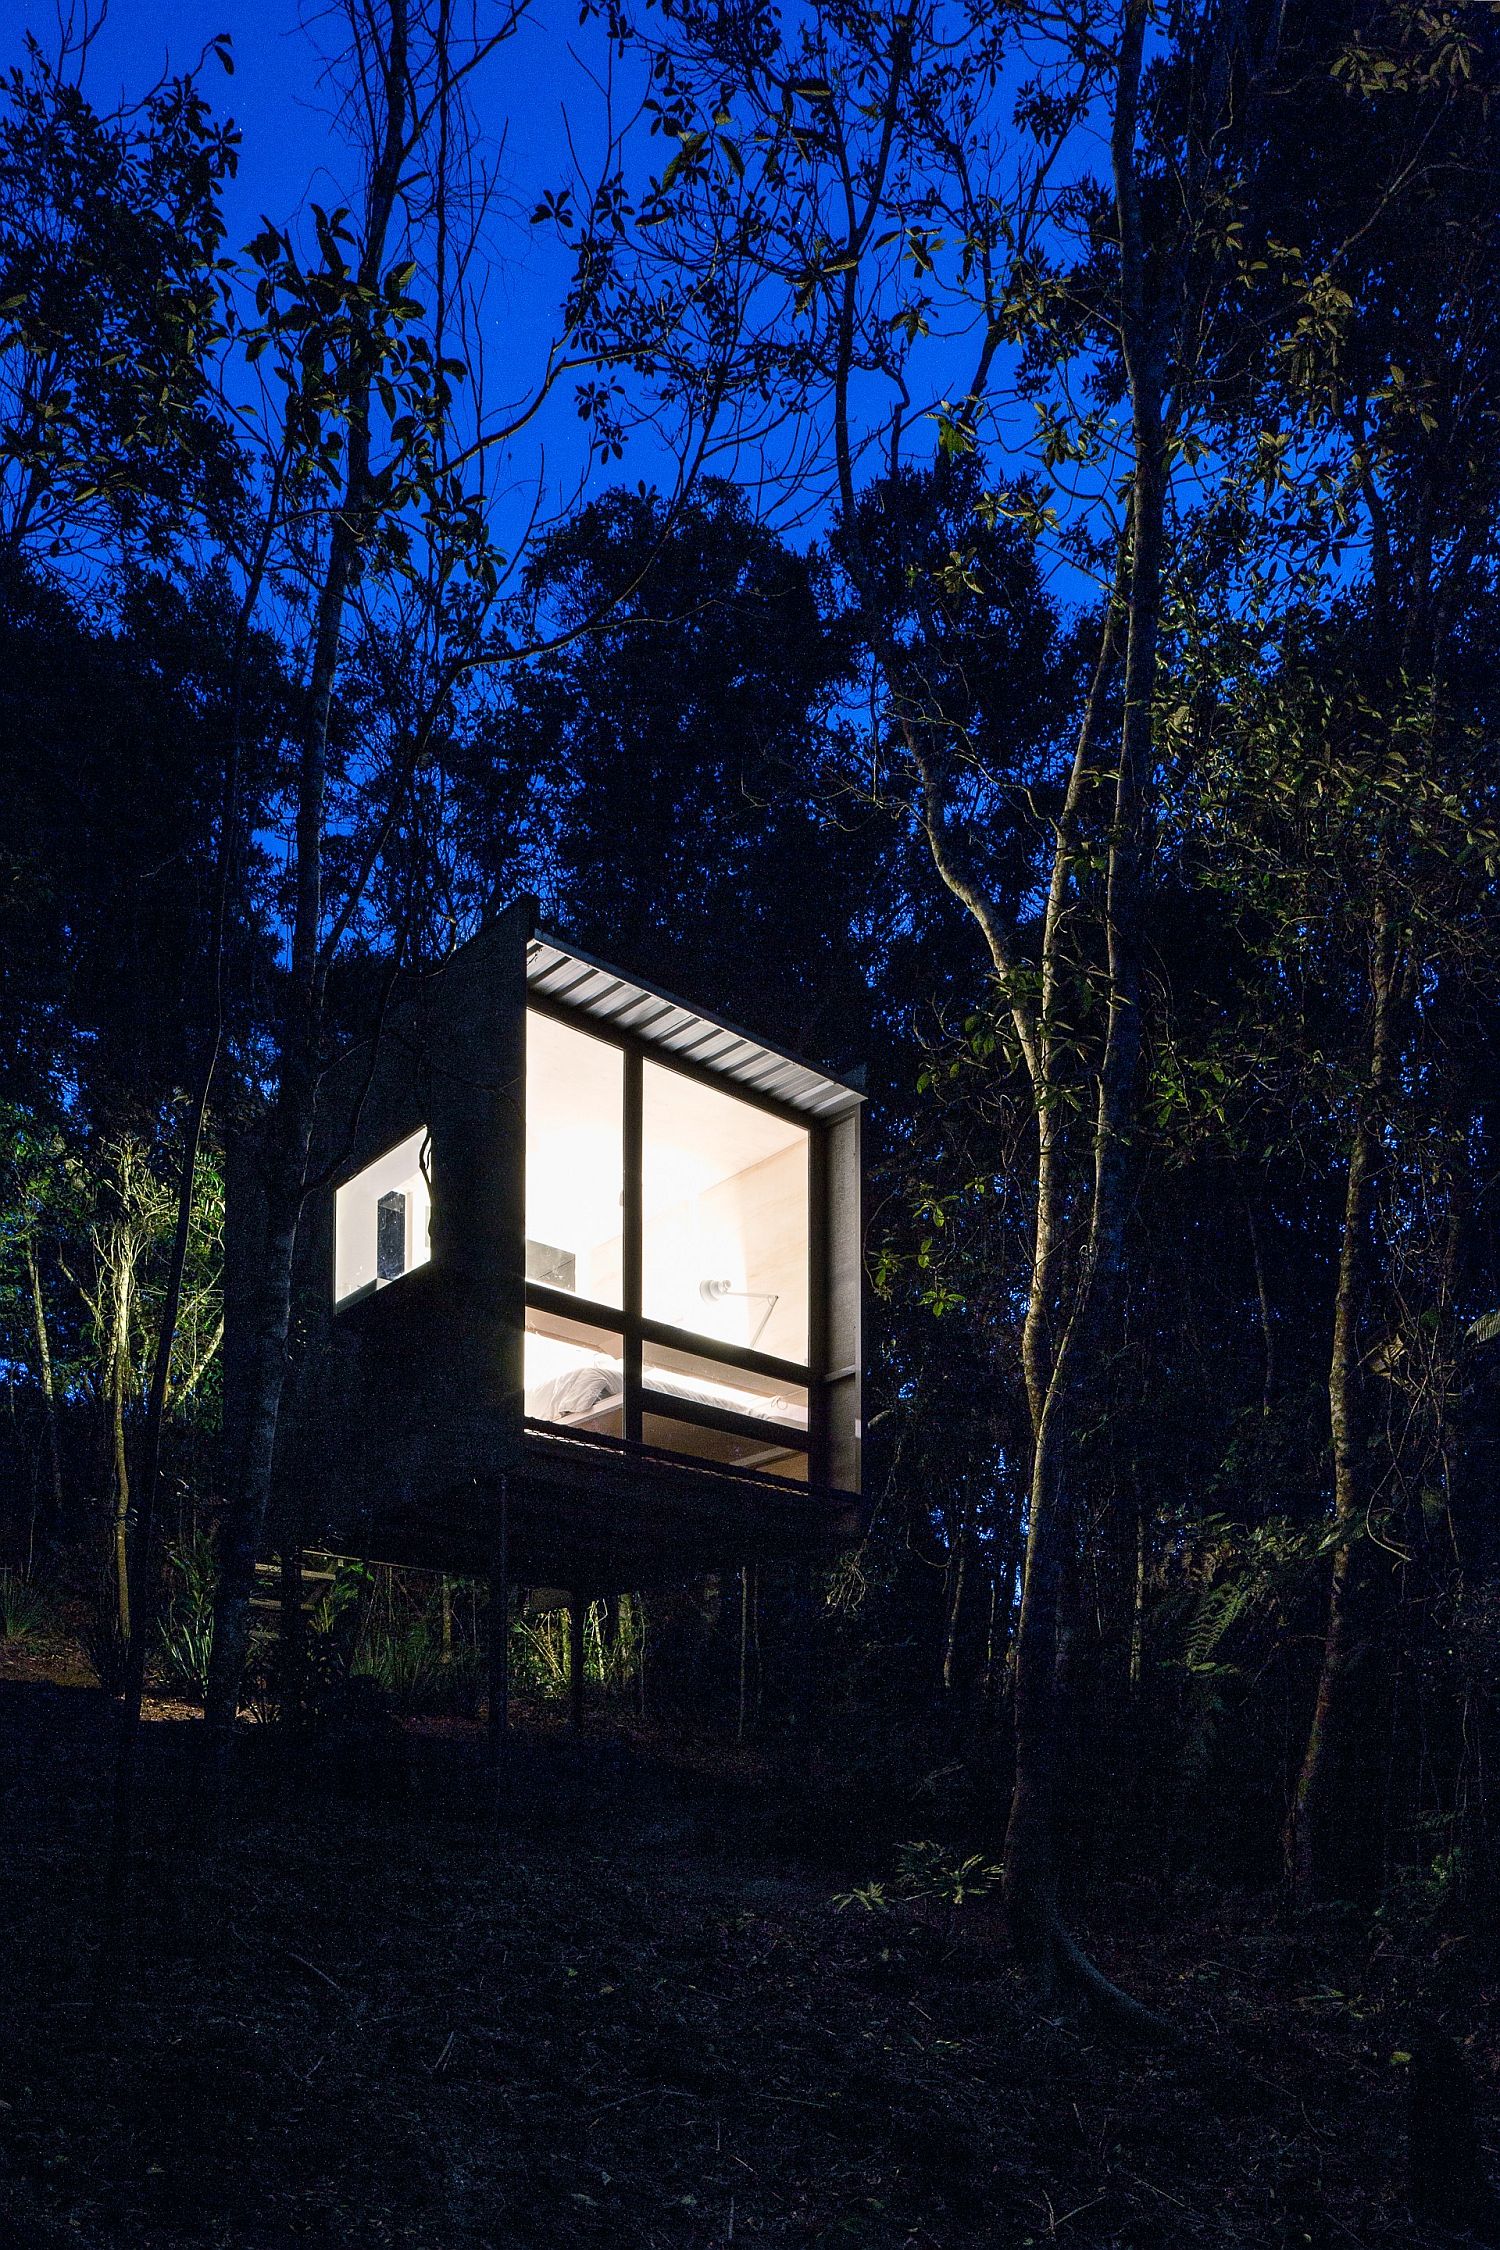 Natural-landscape-around-the-woodsy-cabin-takes-over